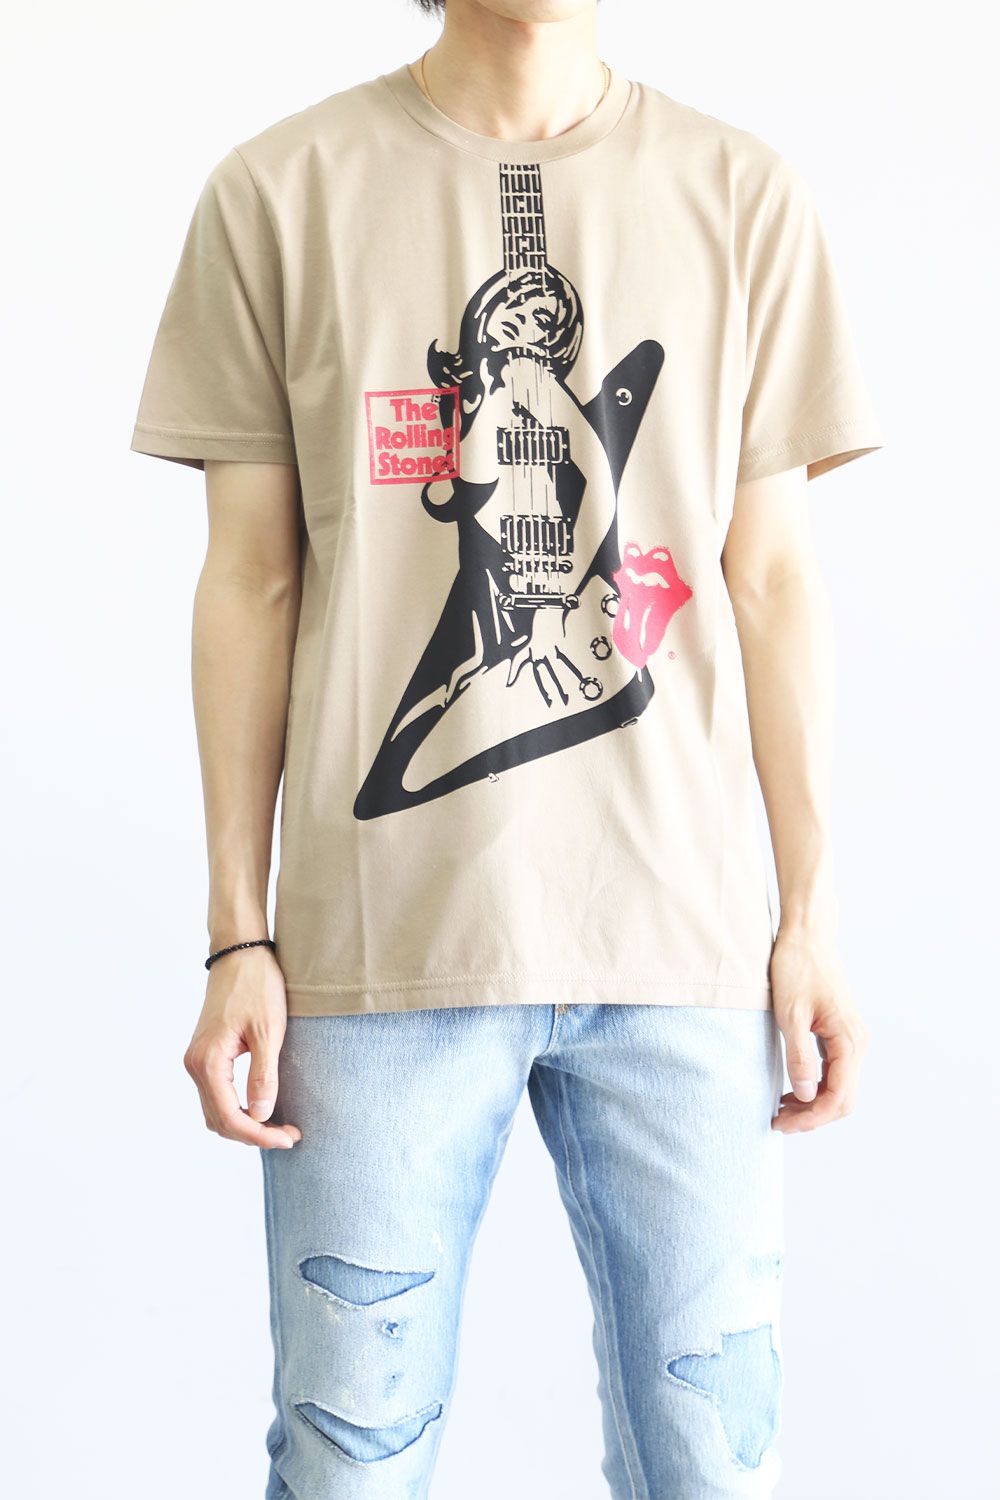 HYSTERIC GLAMOUR - THE ROLLING STONES/STONES LOVES GUITAR GIRL T 